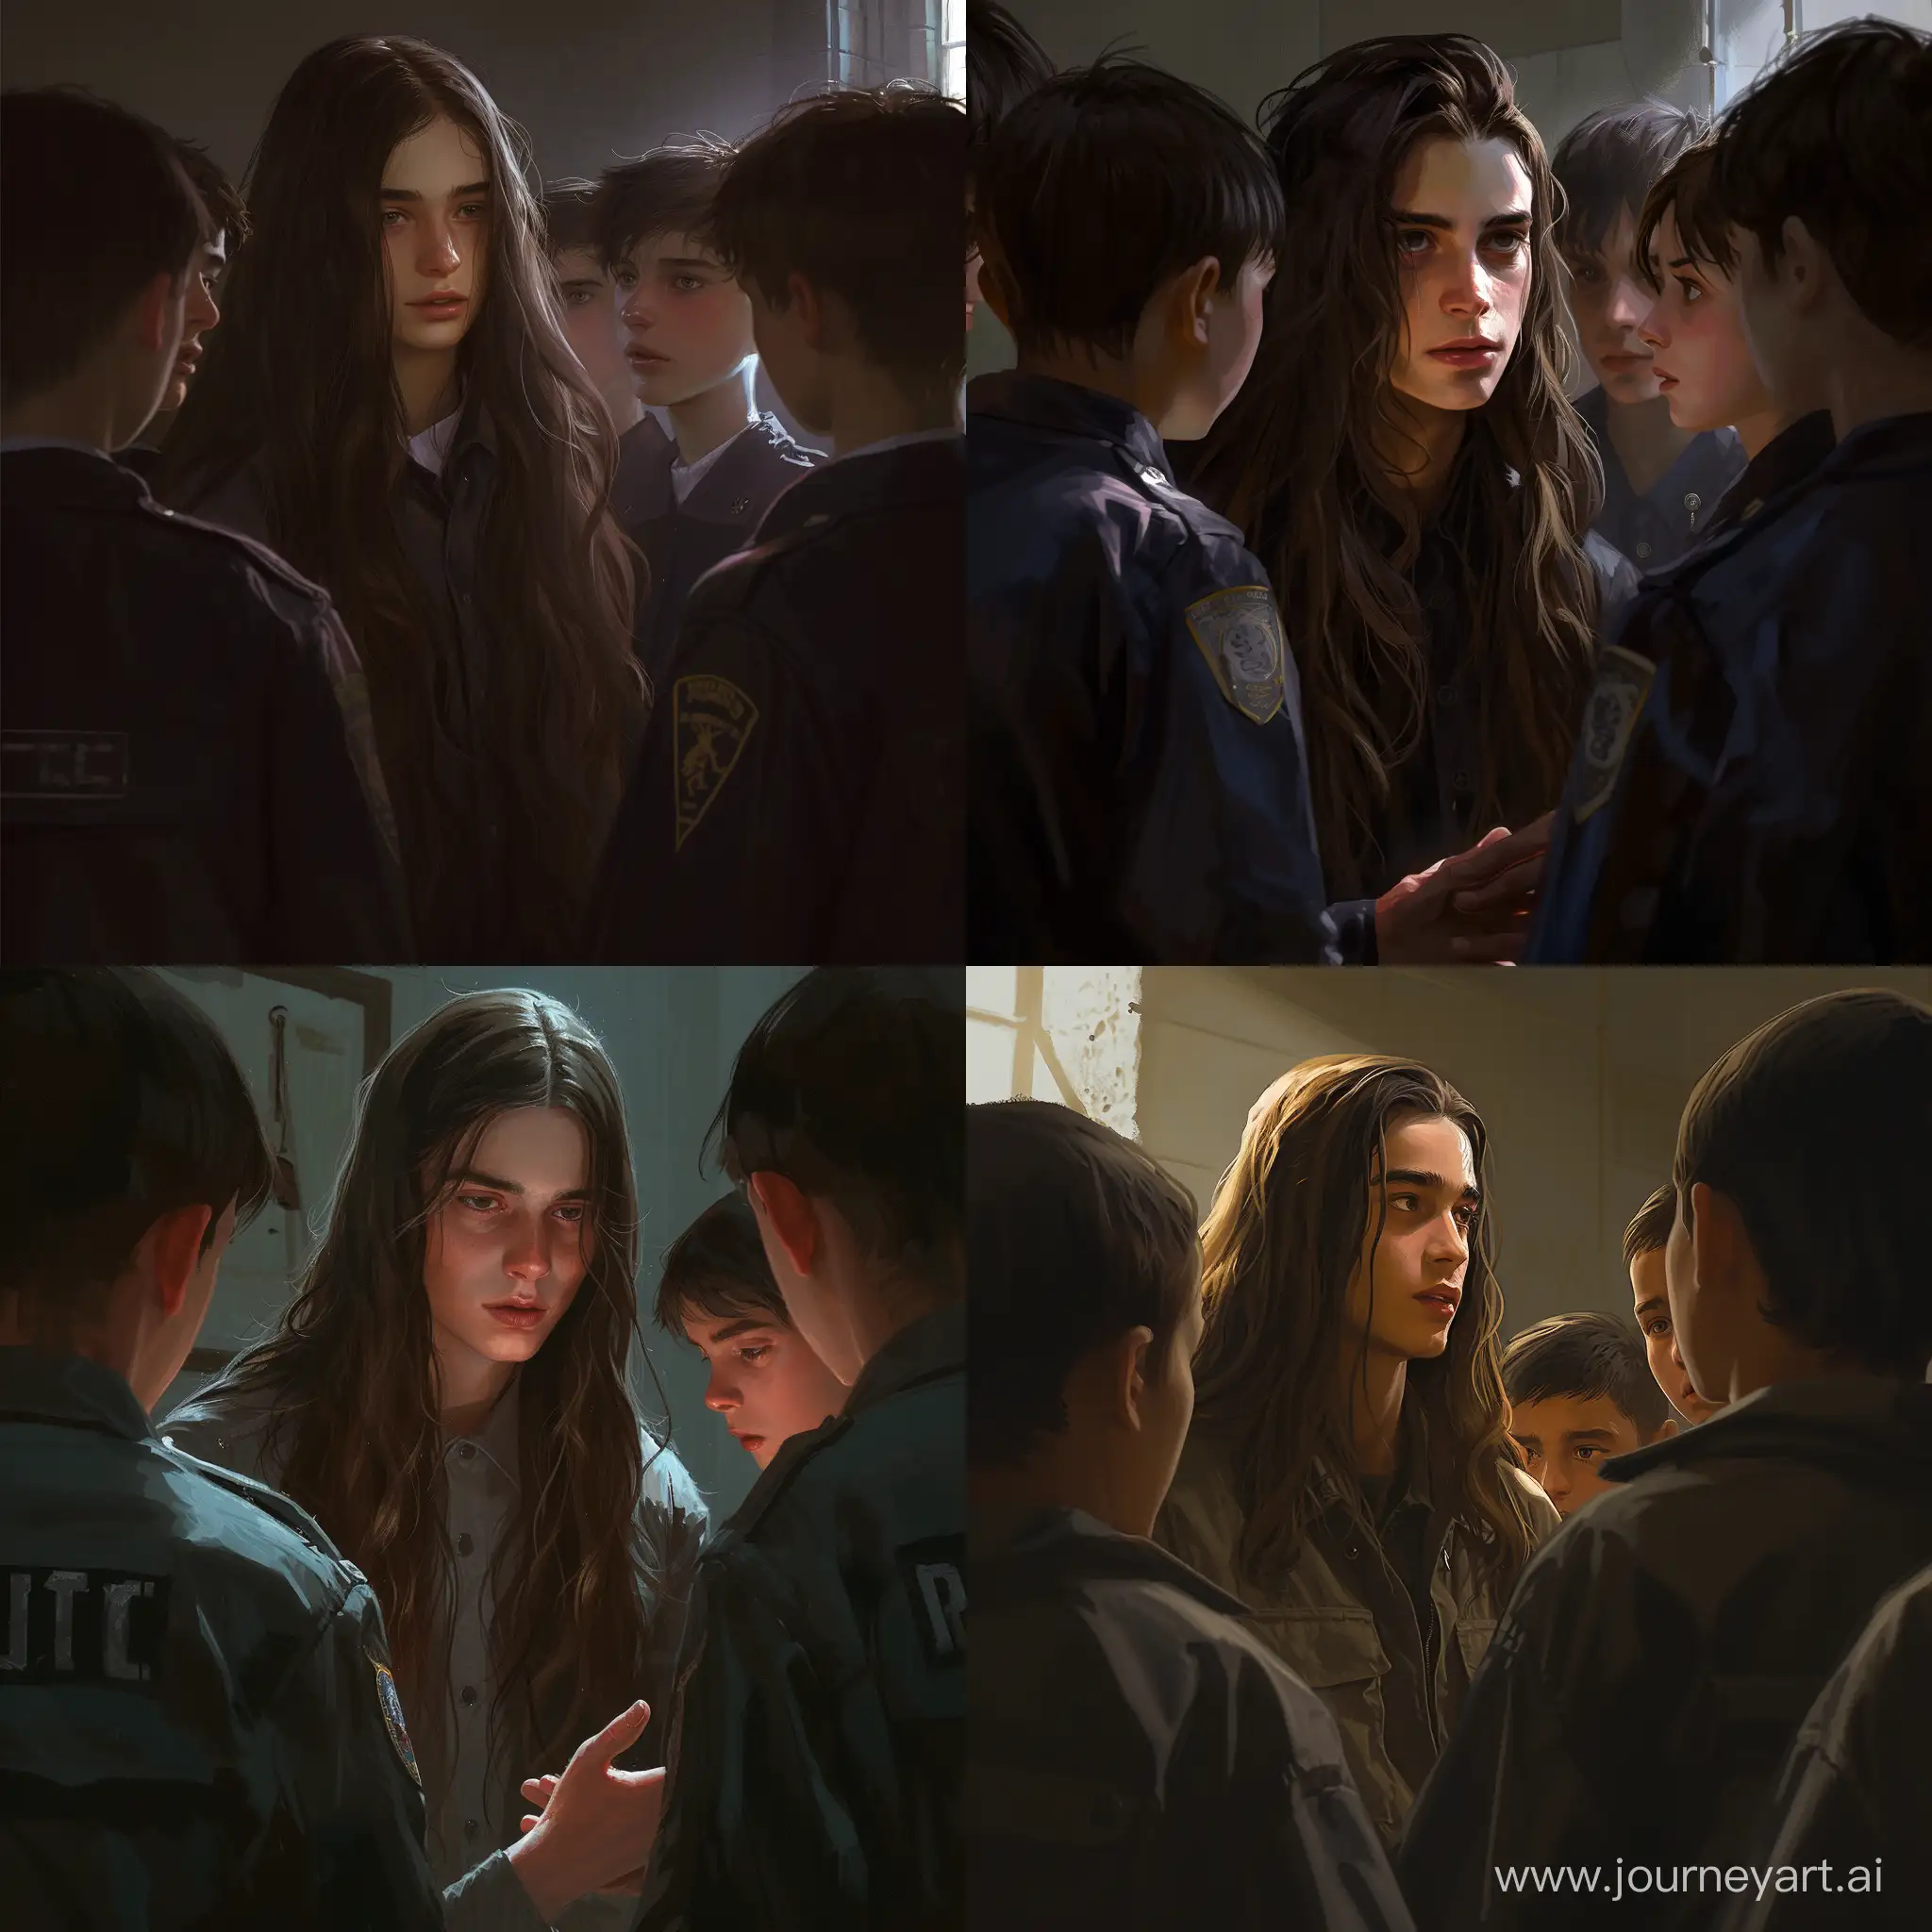 A 17-year-old boy with long brown hair is holding a meeting with police boys, consisting of 14-year-old boys. The scene depicts a 20th century style, with realistic details and dim lighting creating an atmosphere of mystery and intrigue. Visually, the image must be rendered with a high degree of detail, with carefully detailed facial features and clothing. The lighting should be dim, creating shadows and emphasizing the realism of the scene. The mood of the image should be tense and mysterious, making the viewer think about the progress of the meeting and the relationships between the characters